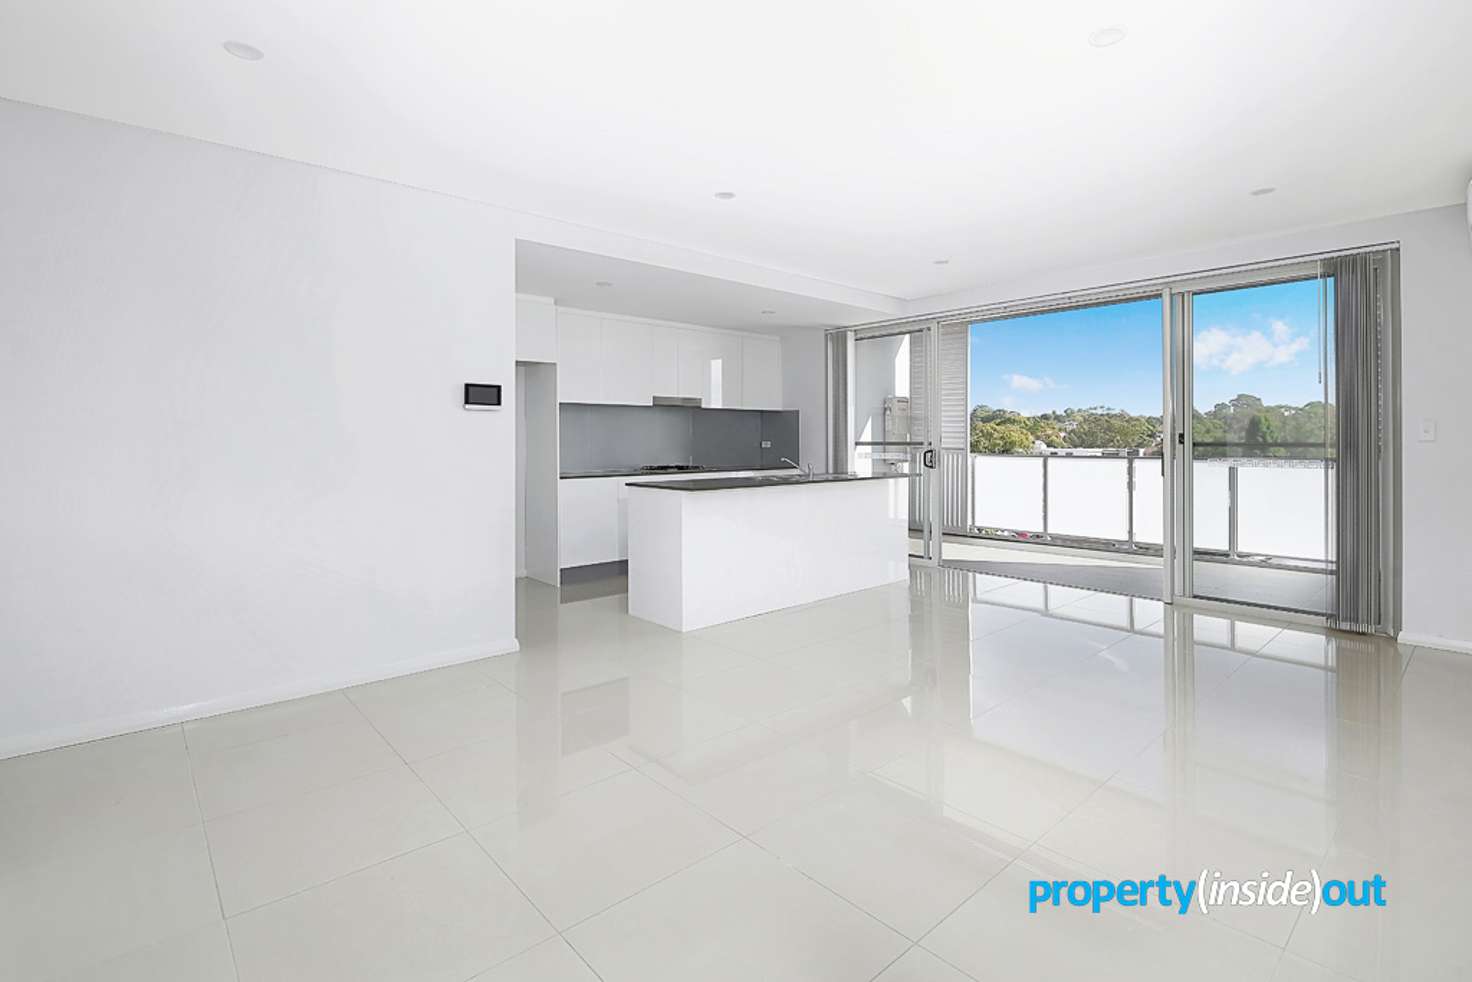 Main view of Homely apartment listing, 39/15-19 Toongabbie Rd, Toongabbie NSW 2146